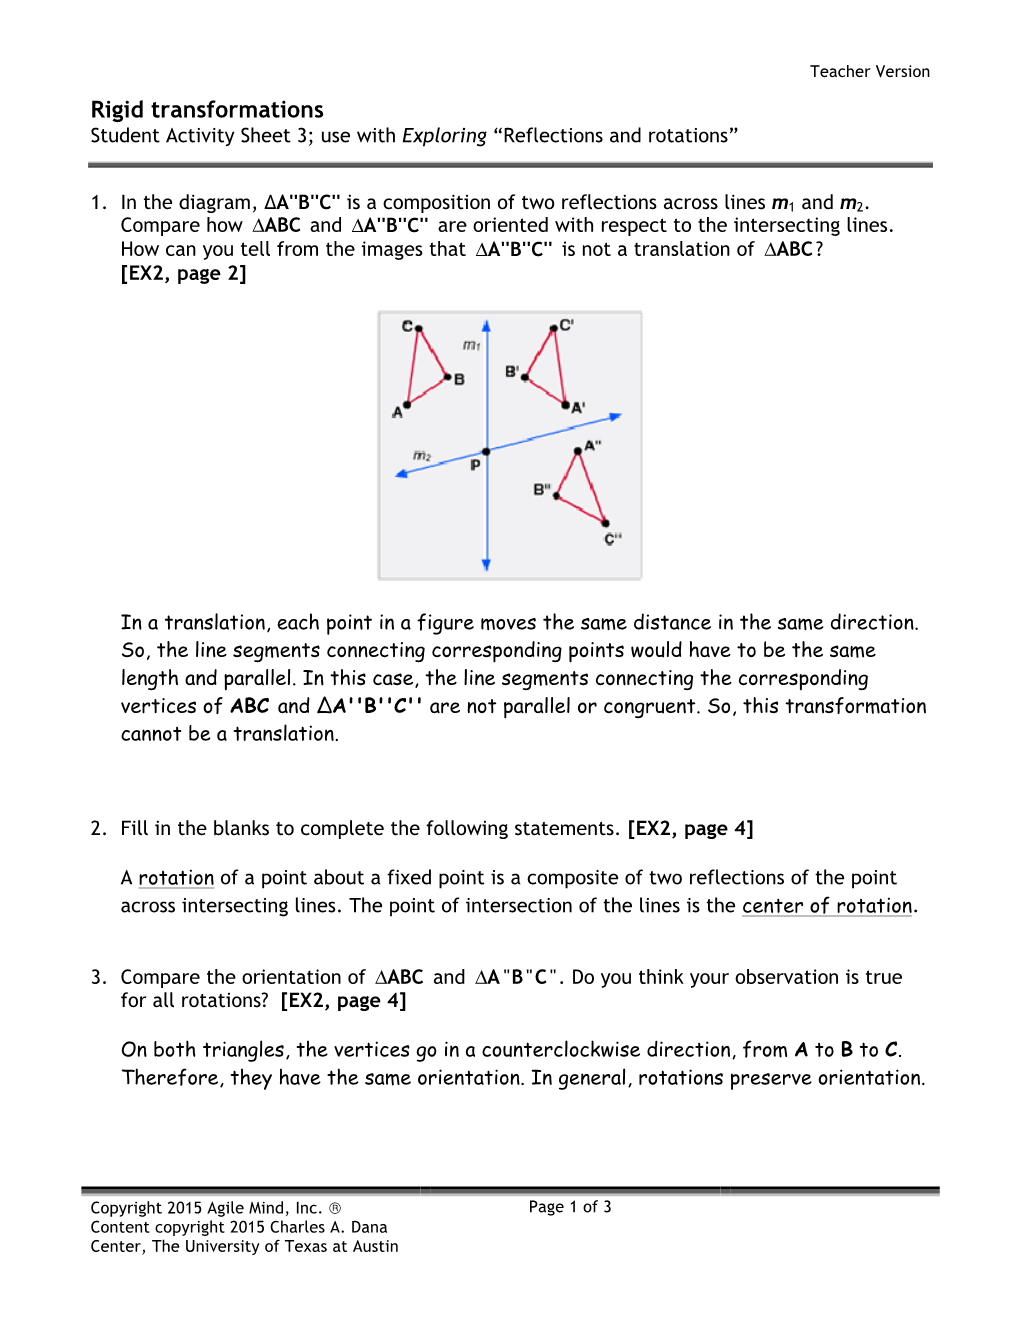 Rigid Transformations Student Activity Sheet 3; Use with Exploring “Reflections and Rotations”